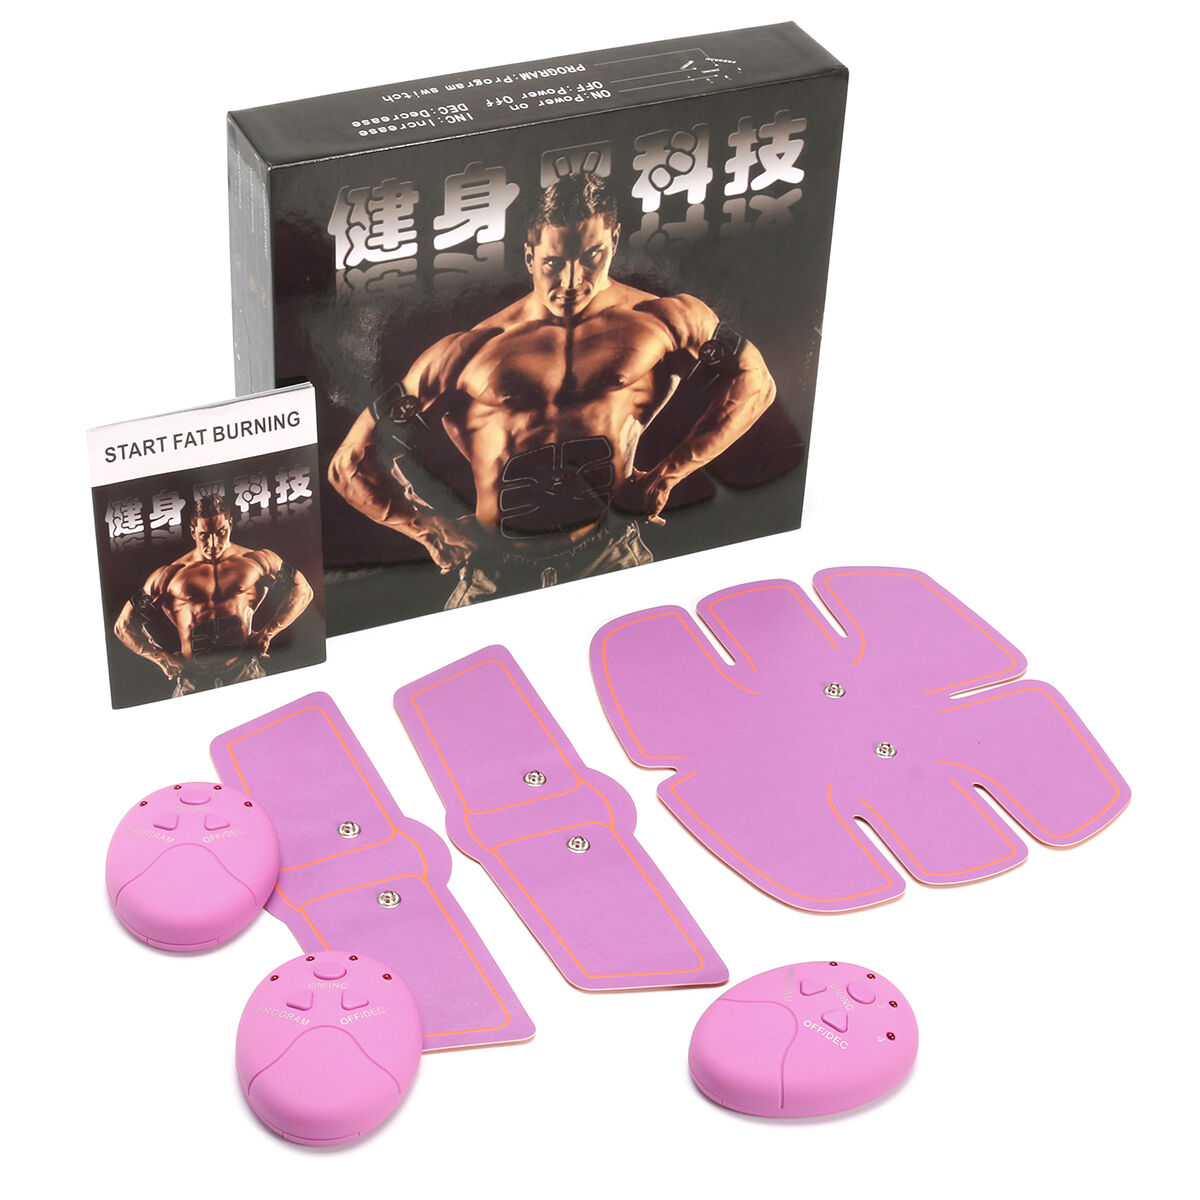 

Abdominal Muscle Toner Body Toning Fitness Training Gear Abs Fit Training Tools